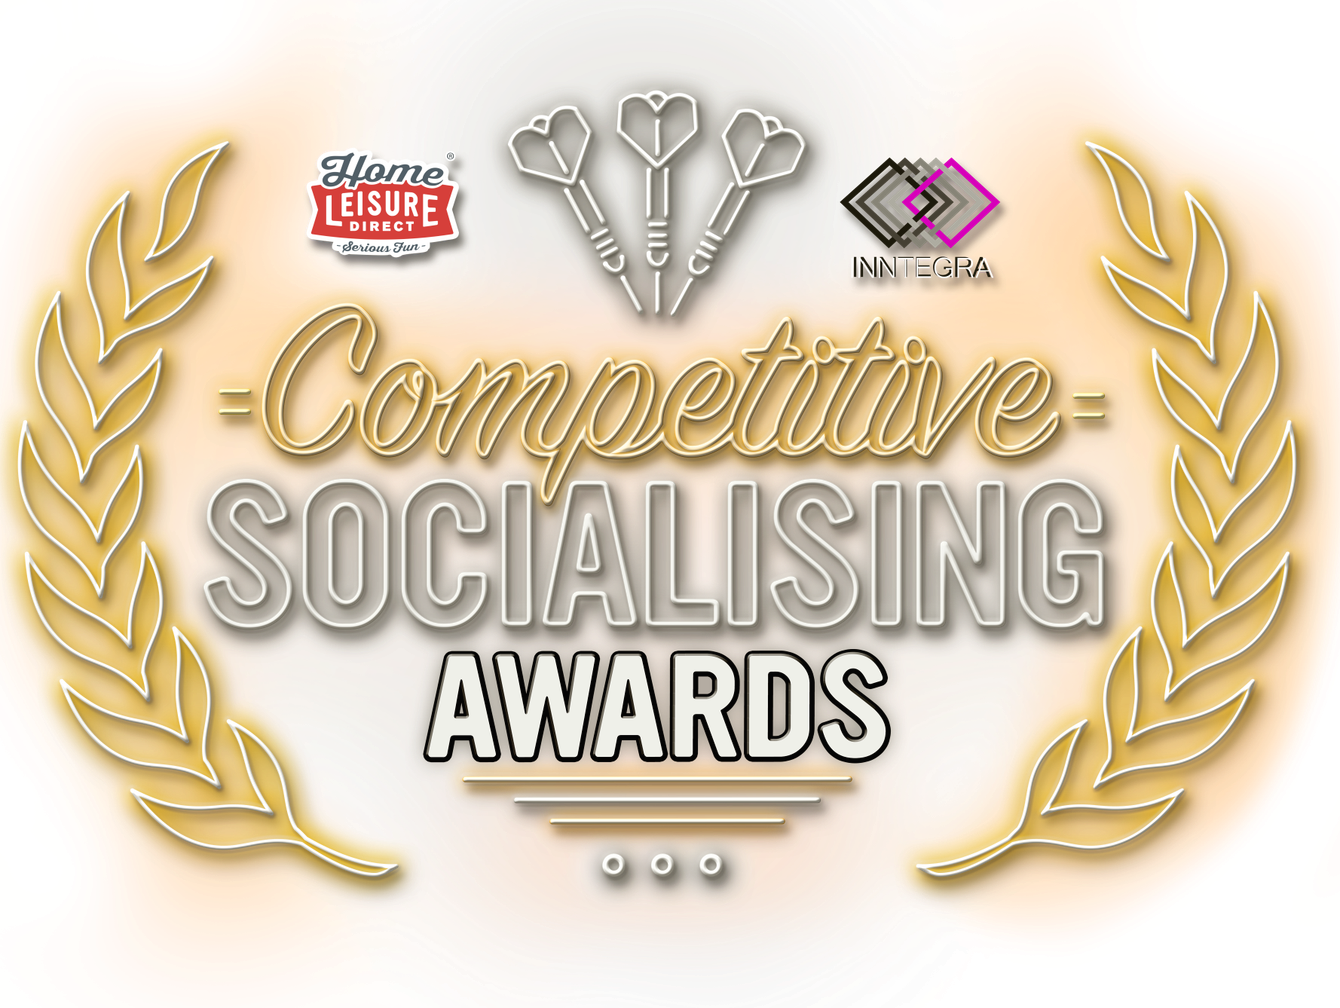 Competitive Socialising Awards